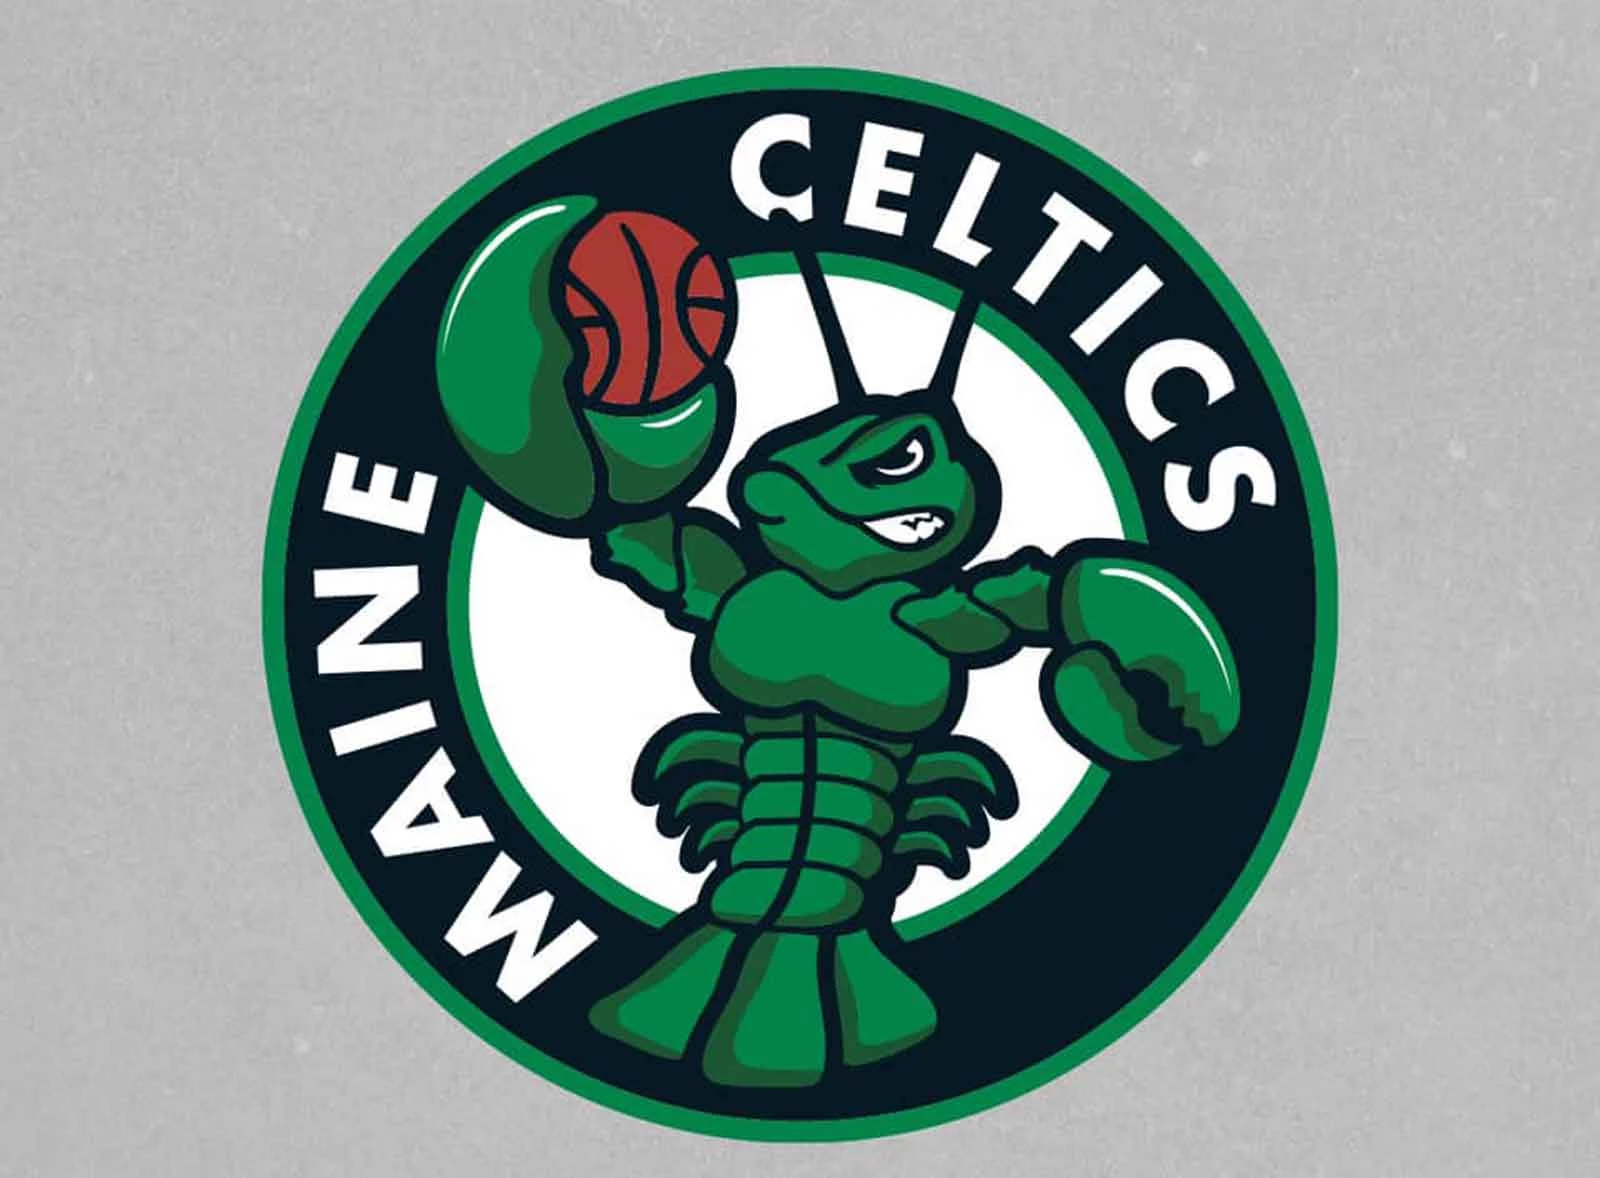 How Does New Celtics Roster Fit Together? w/ Jack Simone and Sam